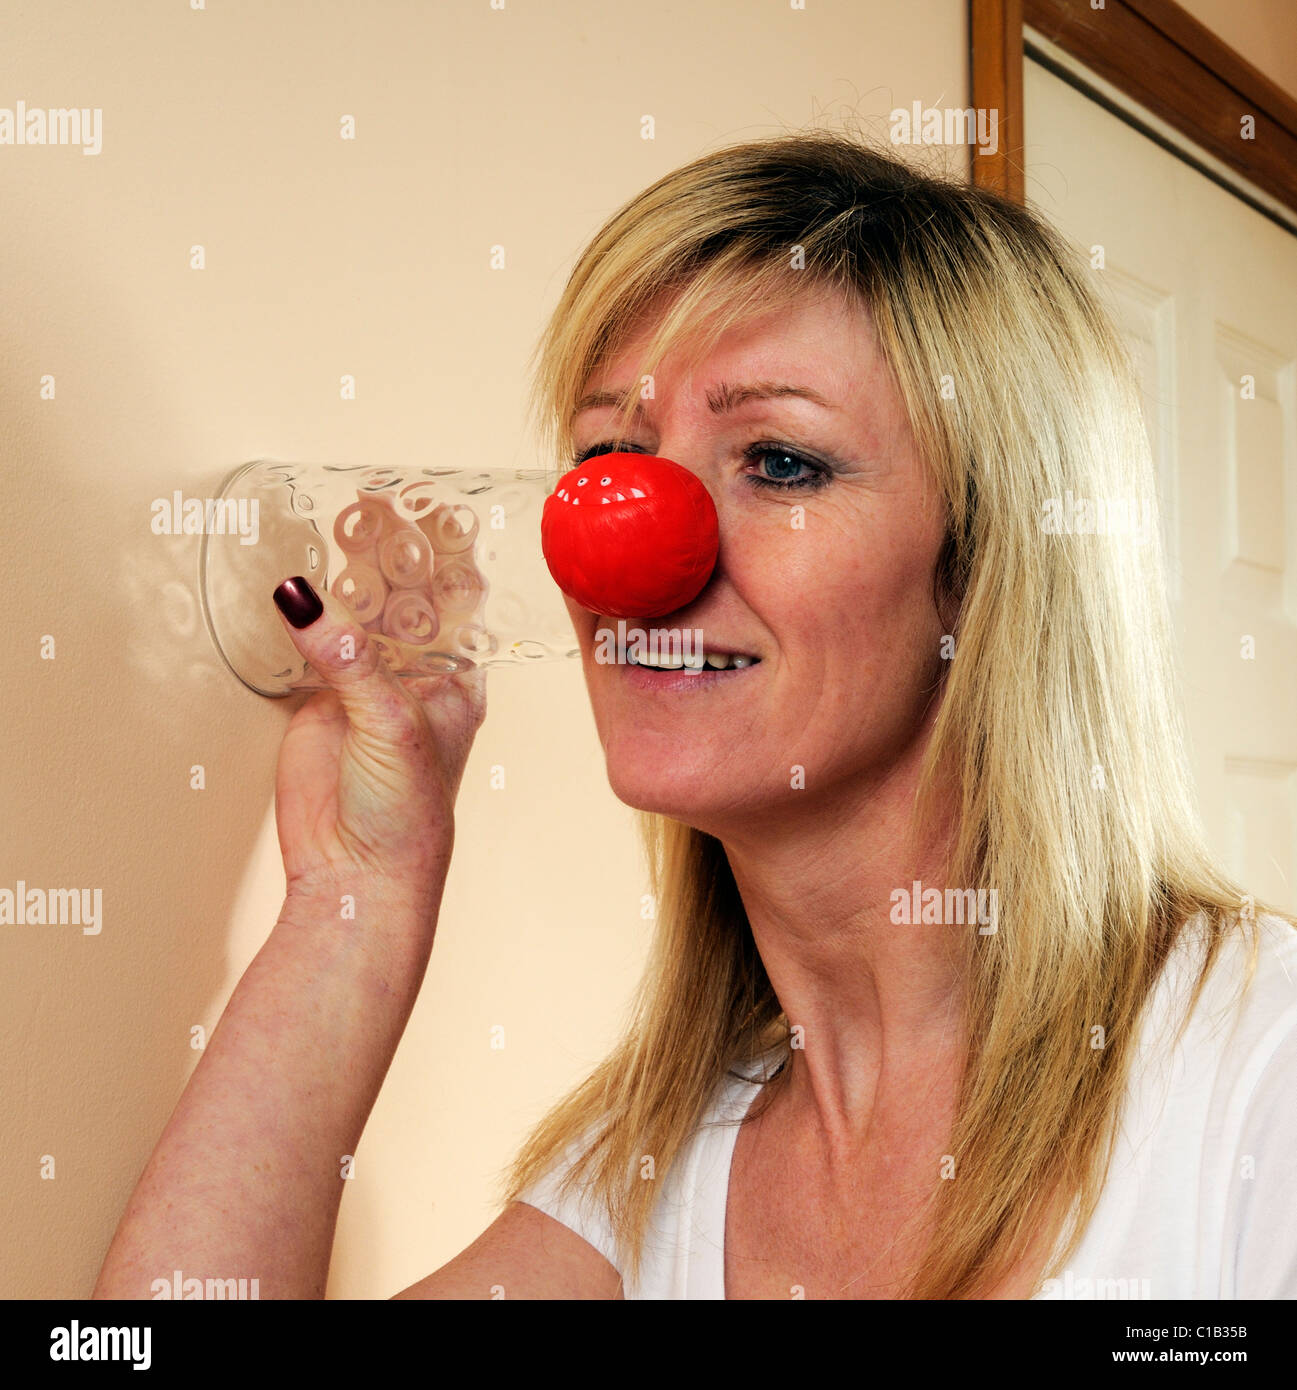 woman-wearing-a-red-nose-uses-a-glass-tumbler-as-a-listening-device-C1B35B.jpg